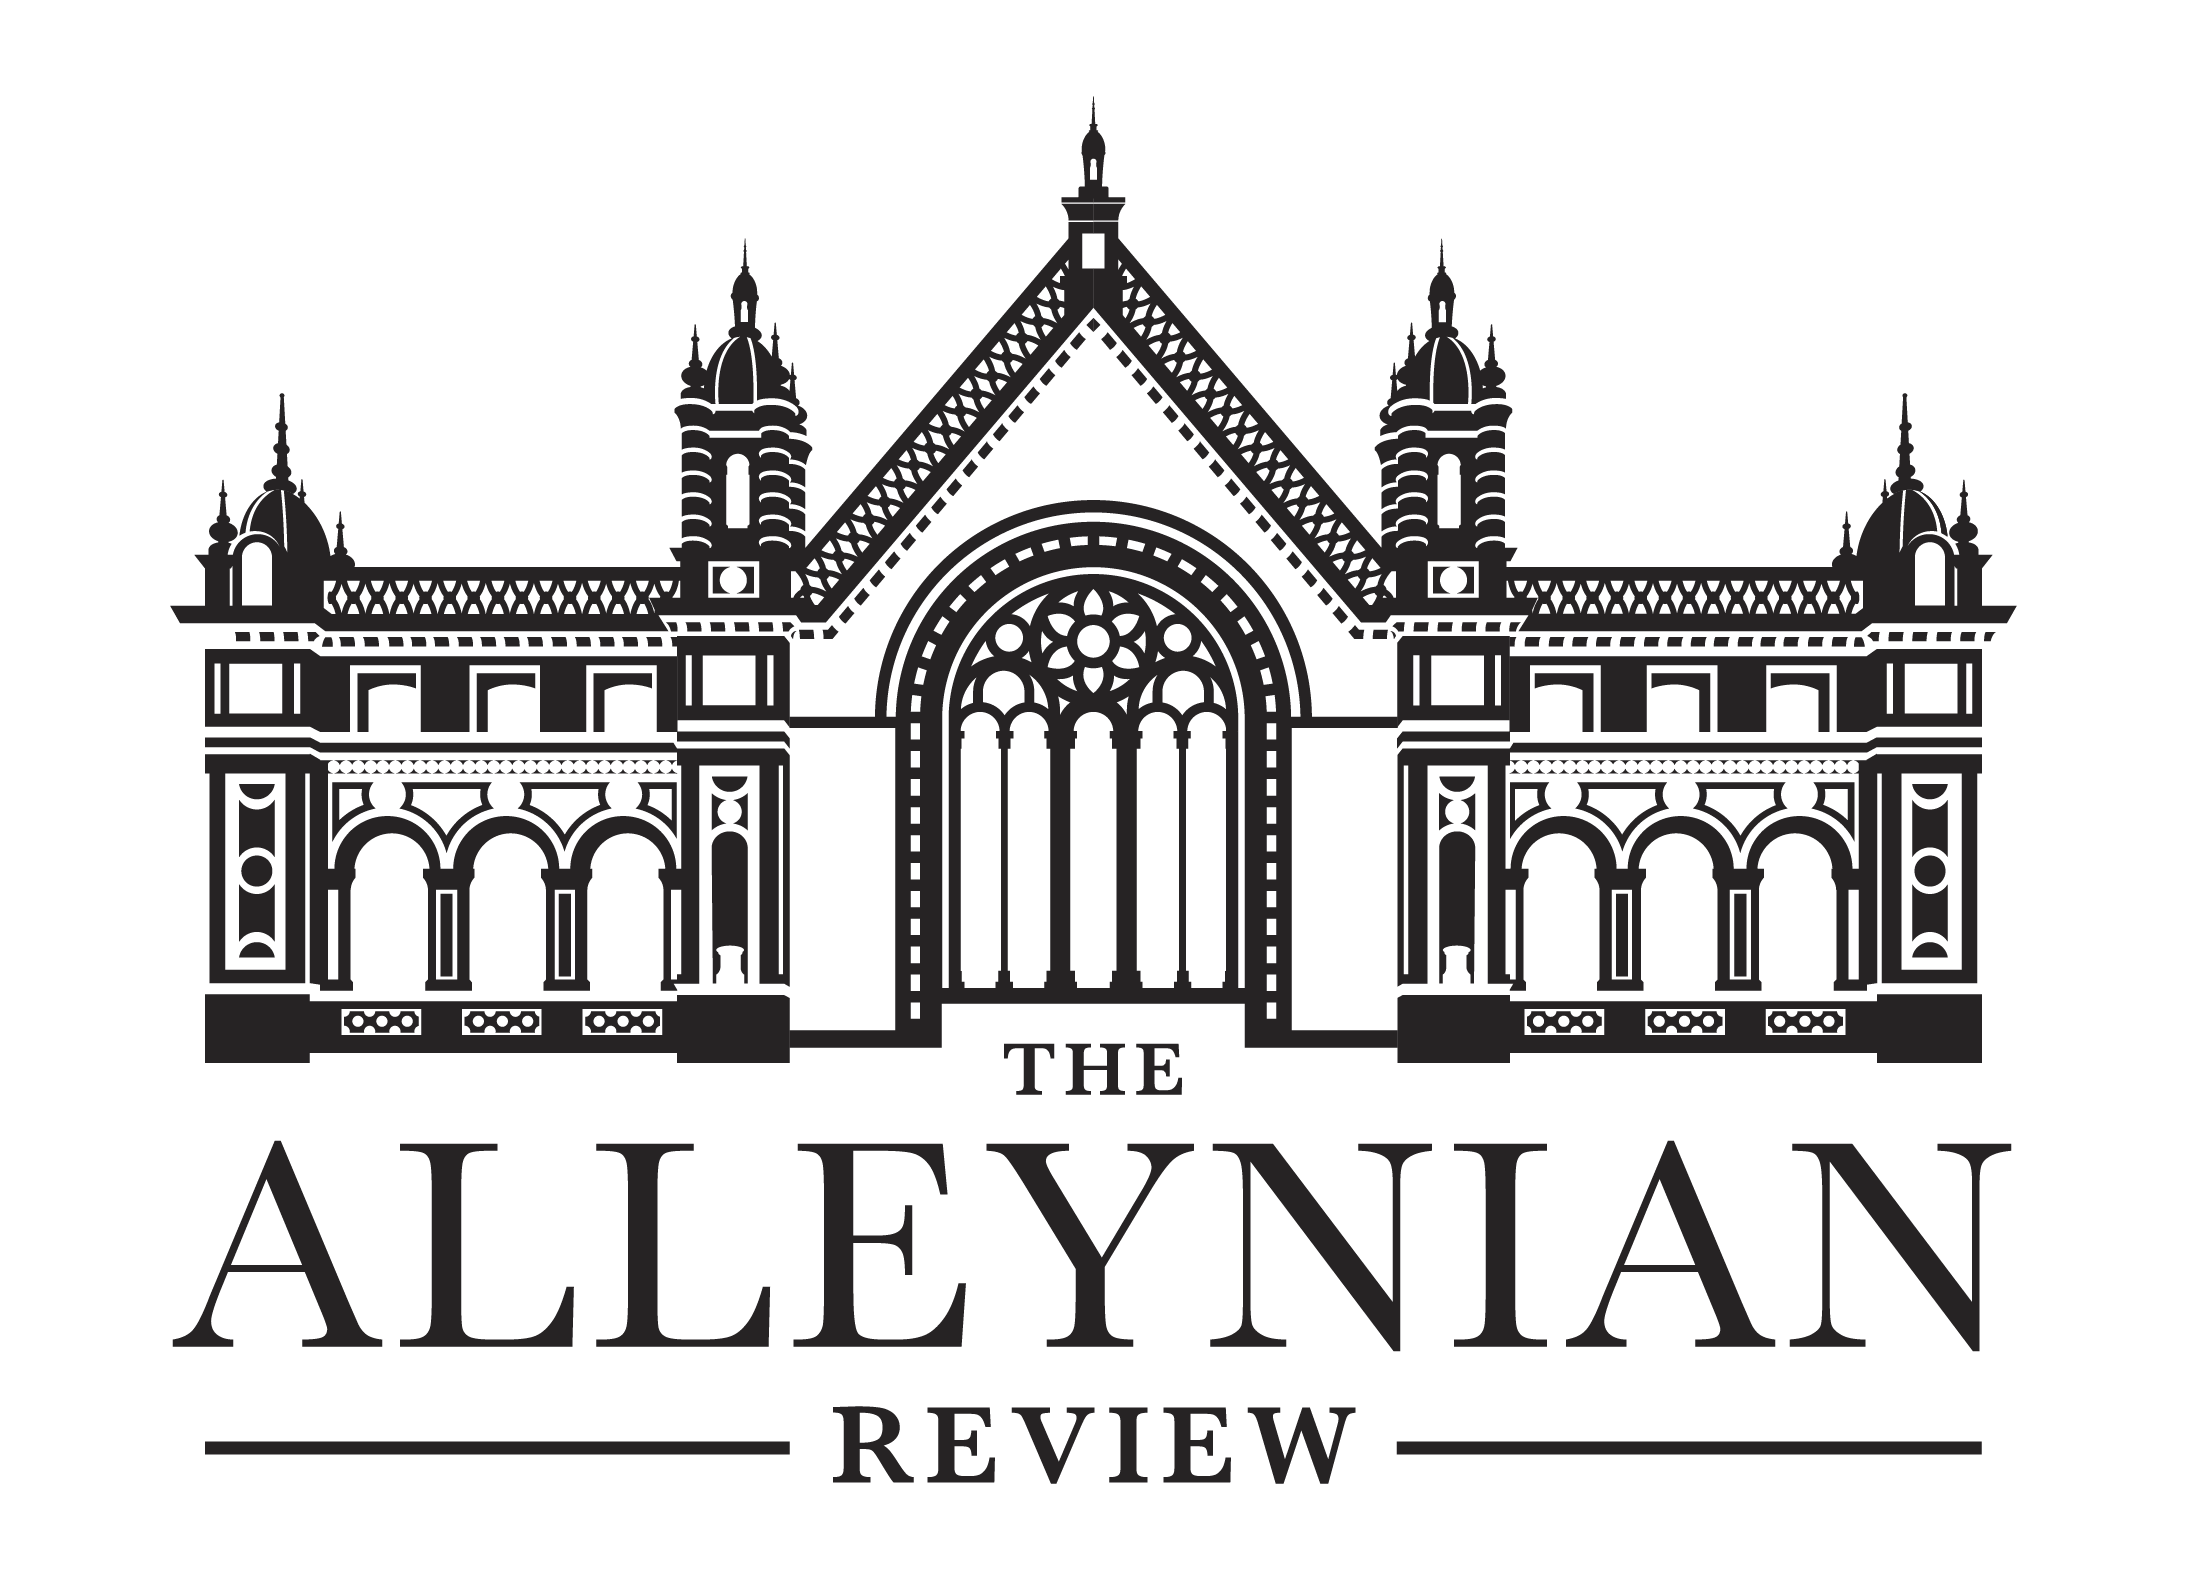 thealleynianreview-logo-07